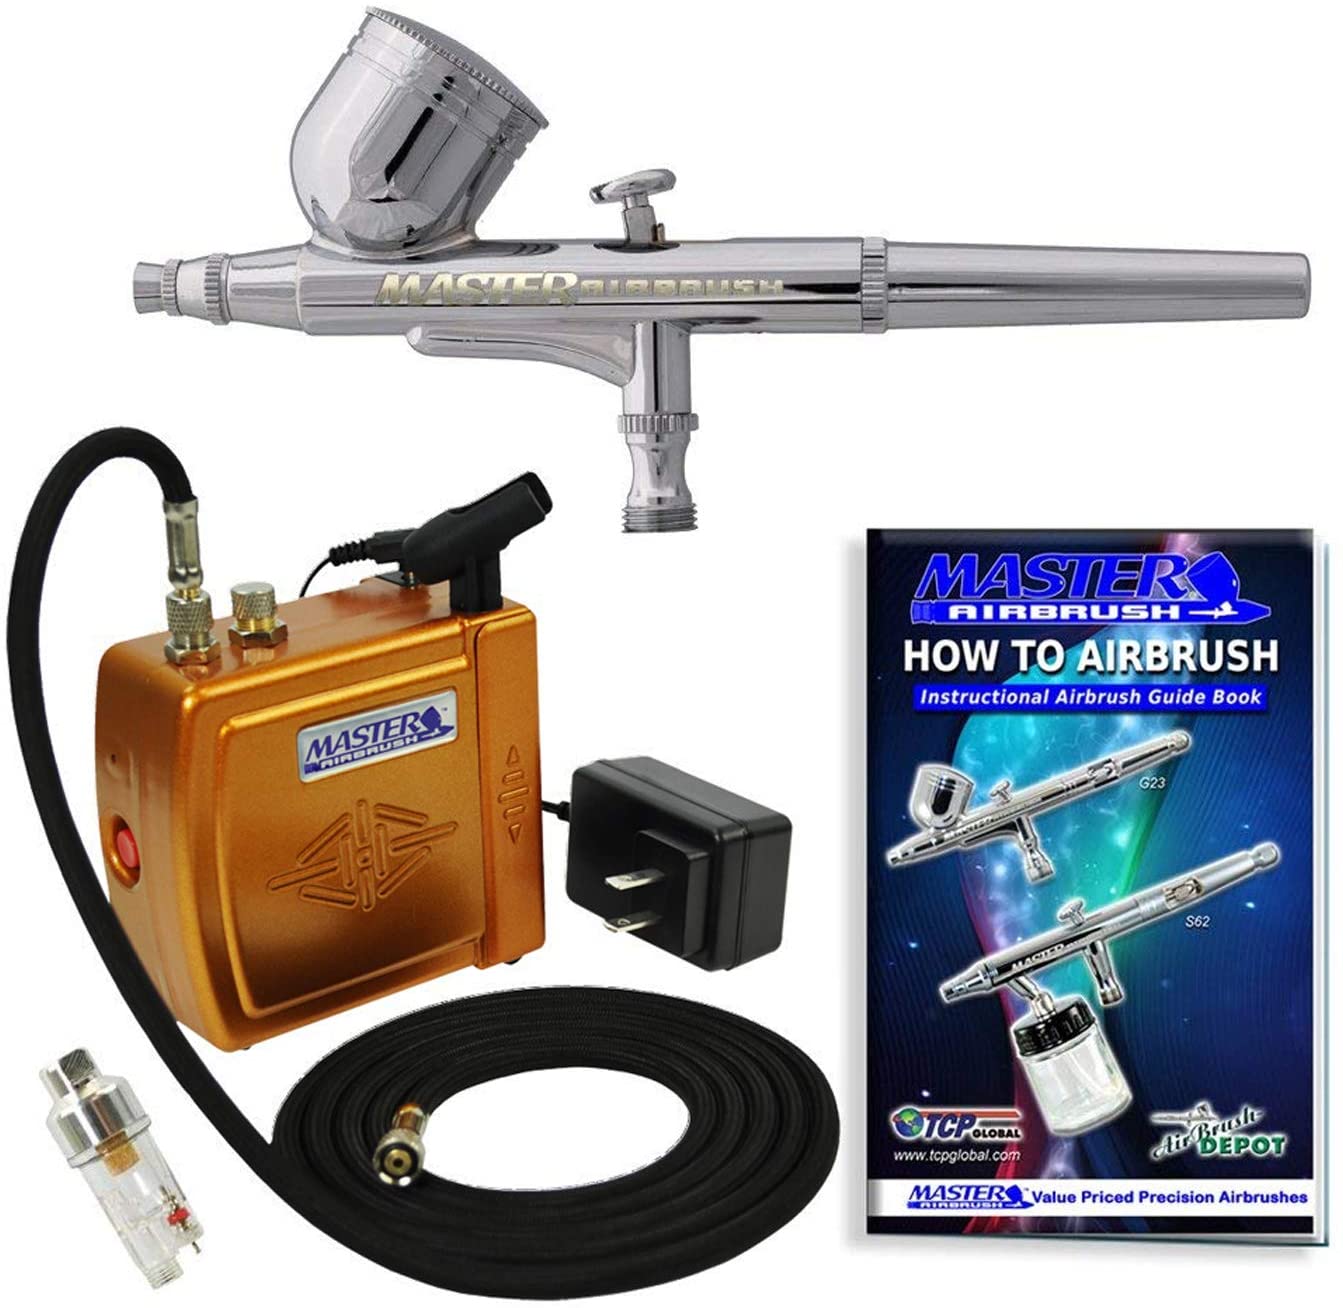 Master Airbrush Multi-Purpose Gold Airbrushing System Kit with Portable  Mini Air Compressor Gravity Feed Dual Action Airbrush, Hose,  How-To-Airbrush